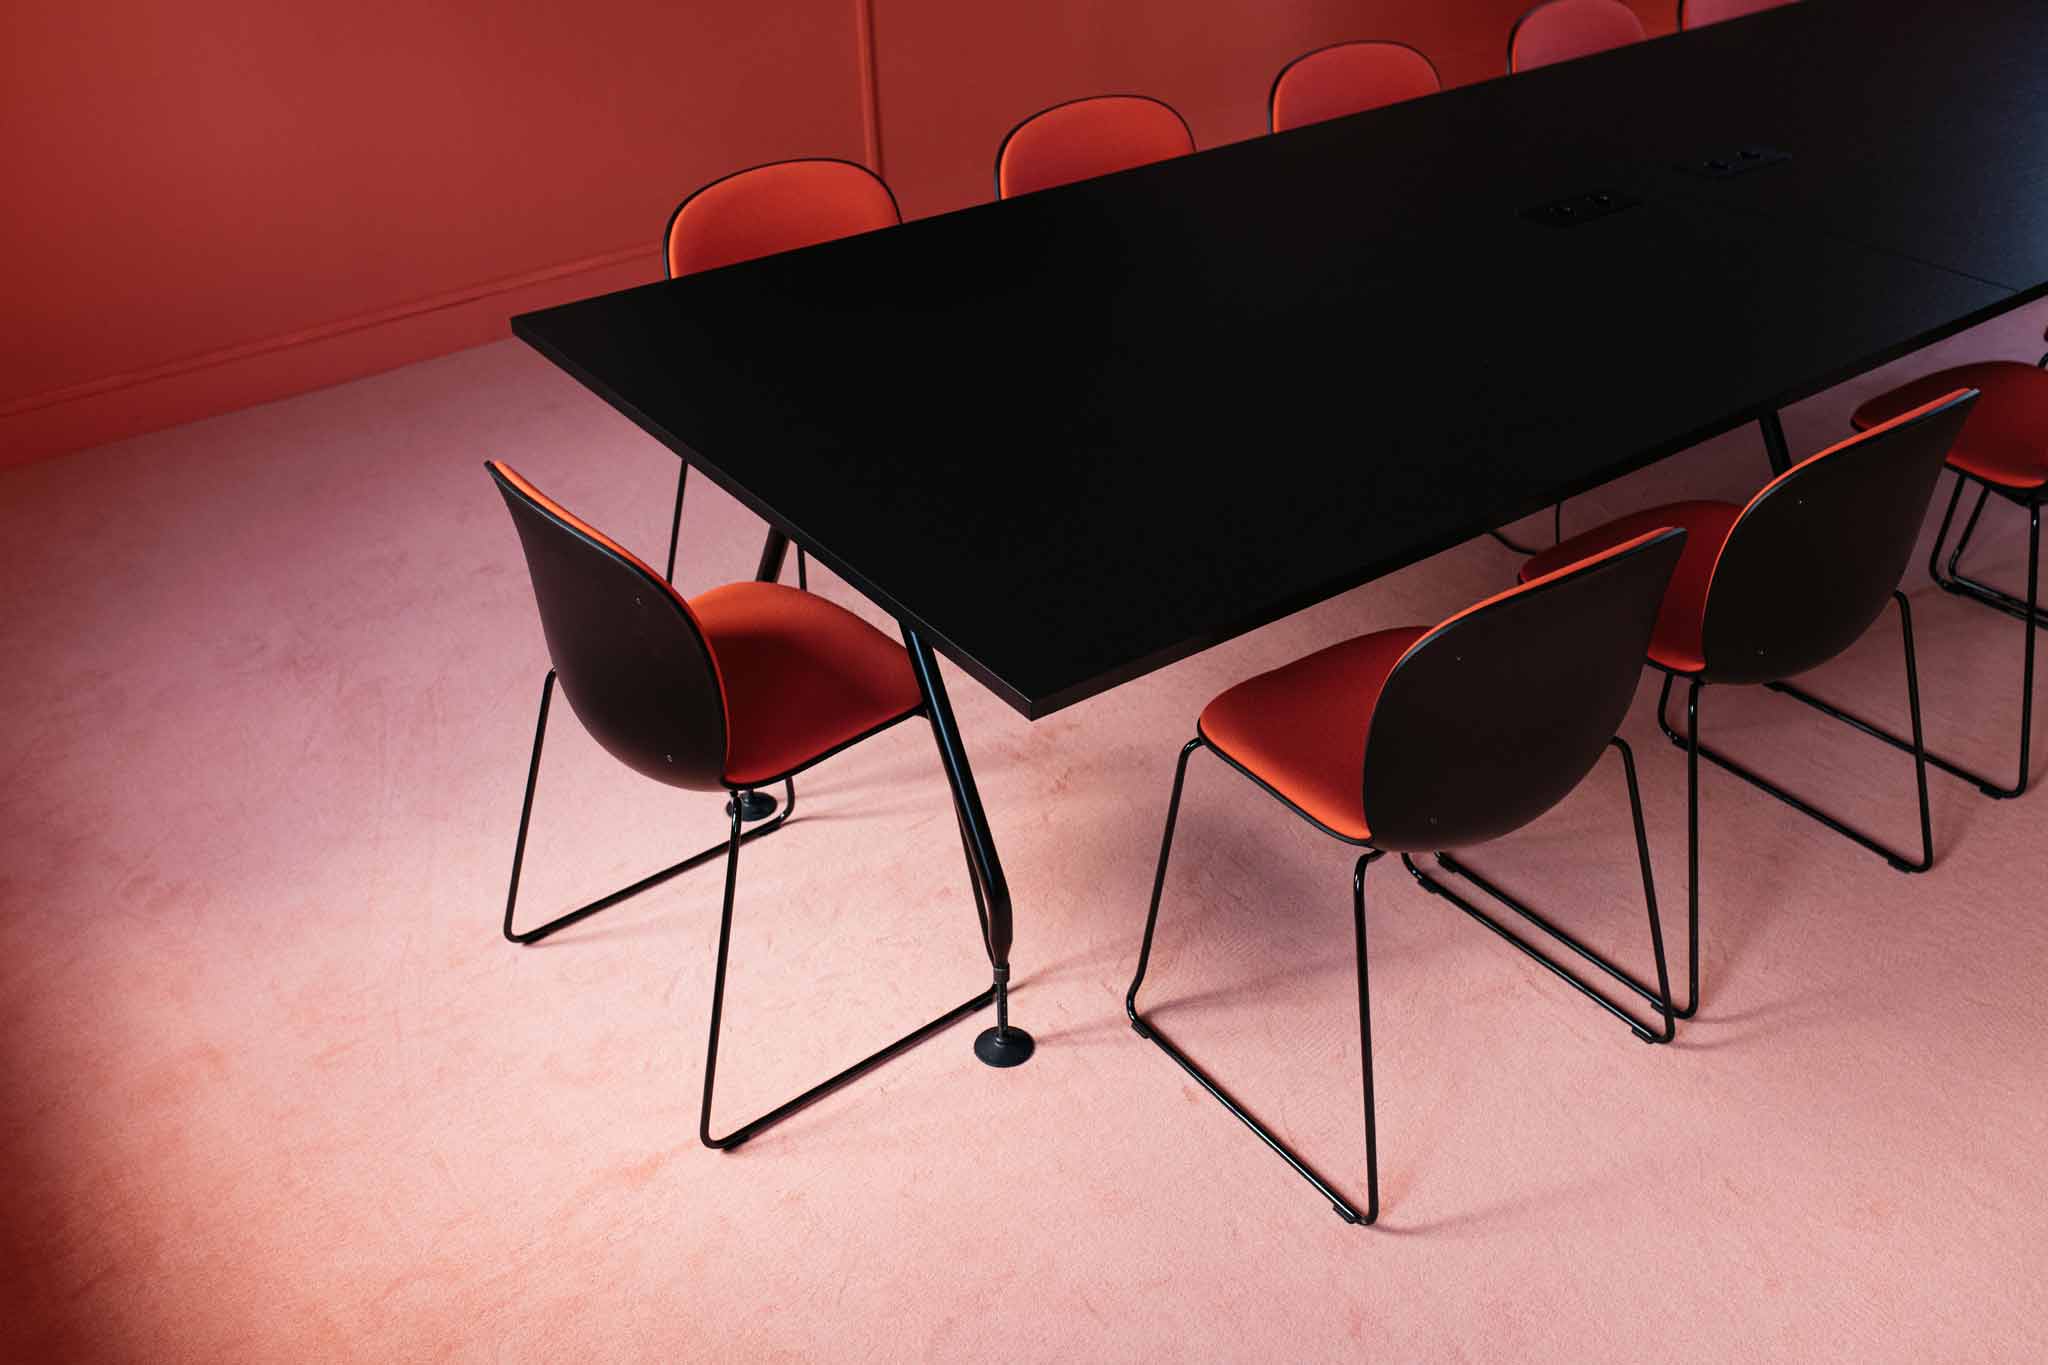 Close up of RBM Noor chairs in red with graphite shell at Vaesharltelt Hotel, Netherlands